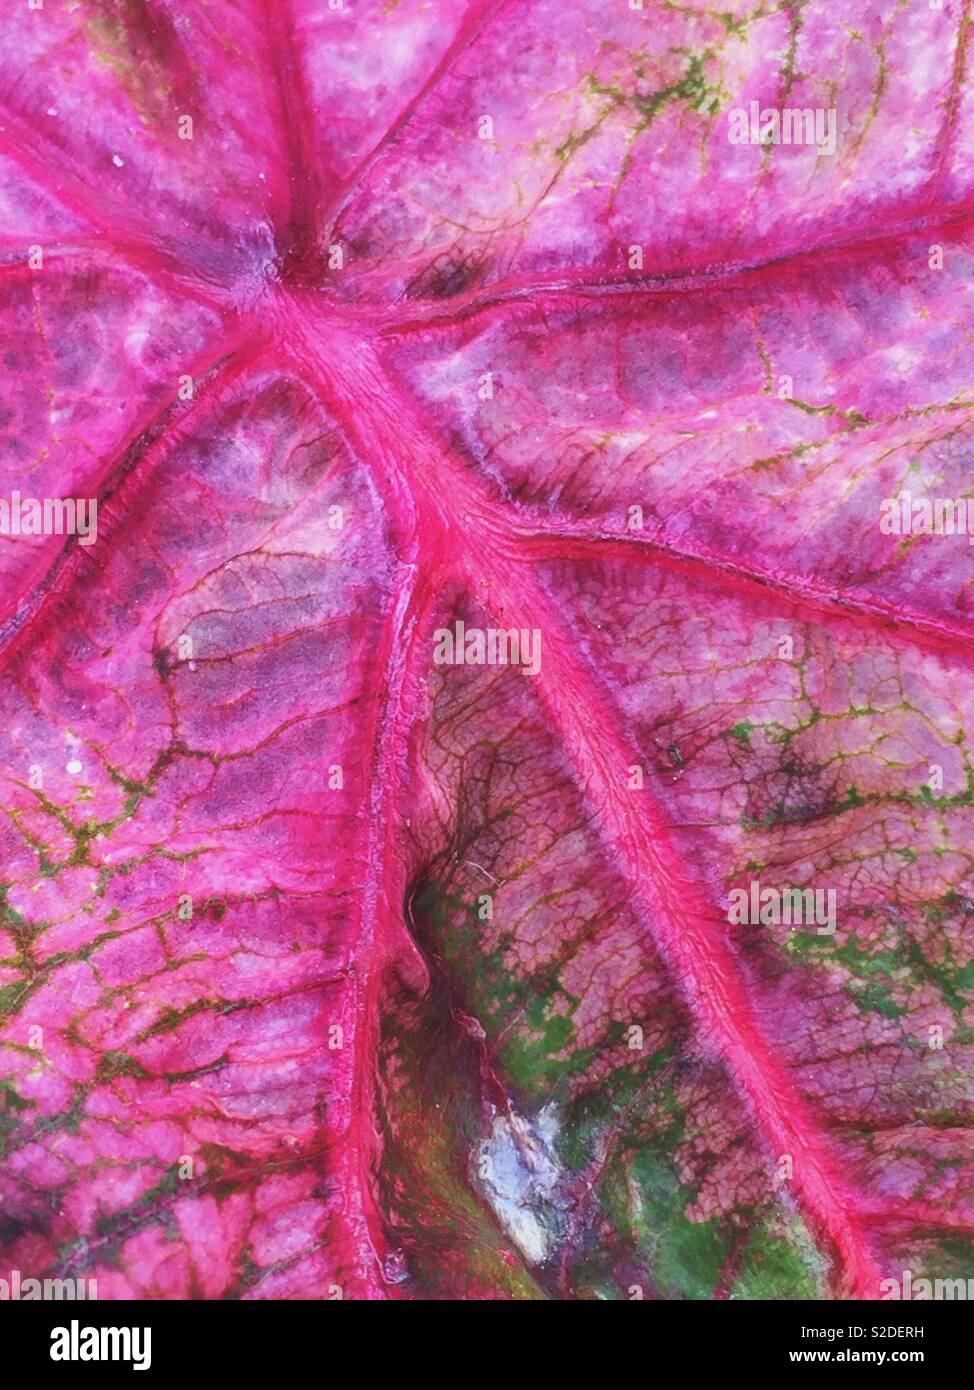 Hot pink and green plant leaf Stock Photo